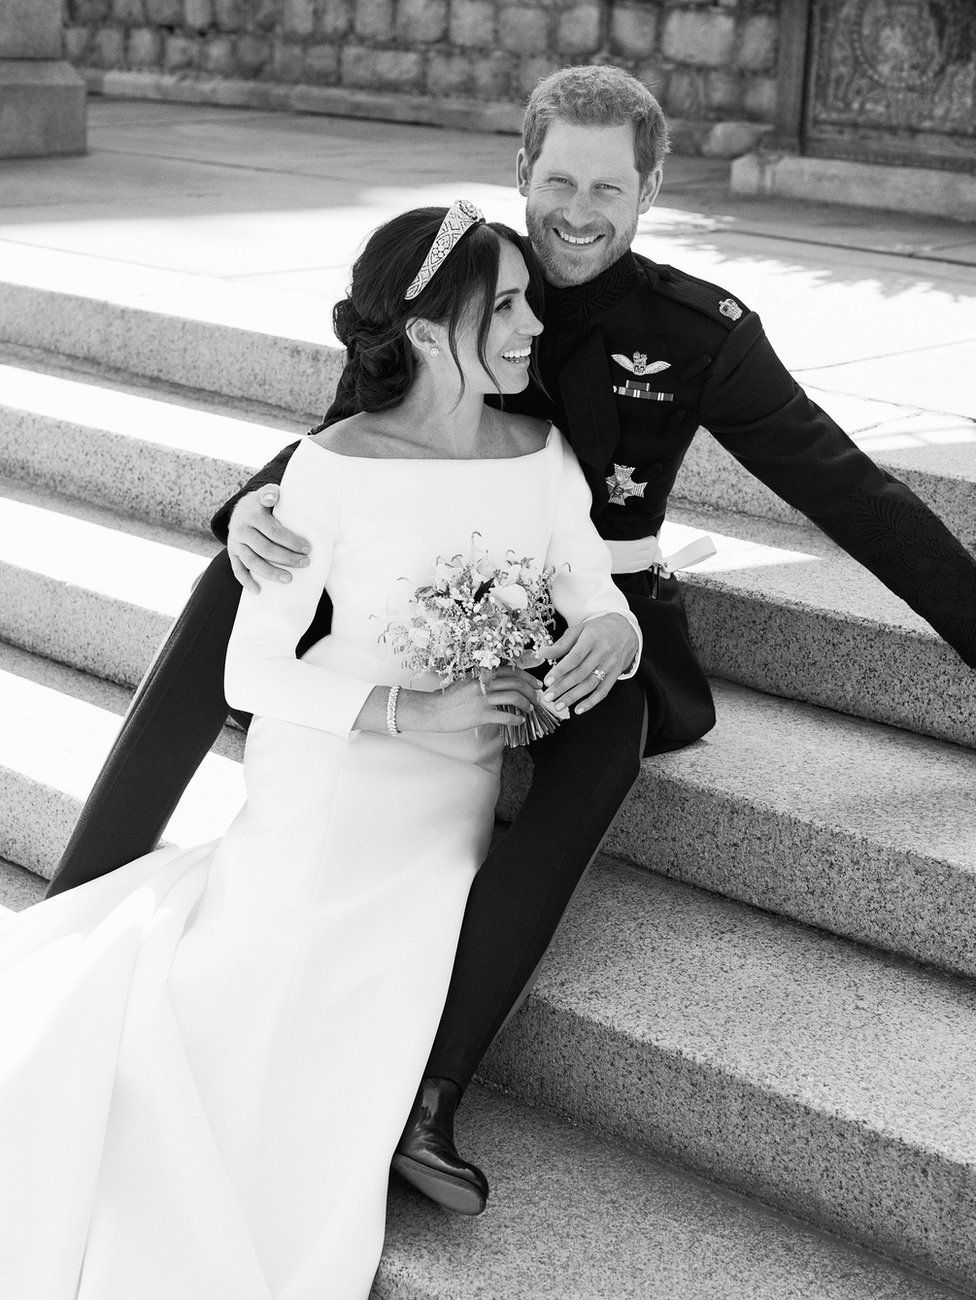 Harry and Meghan on the steps